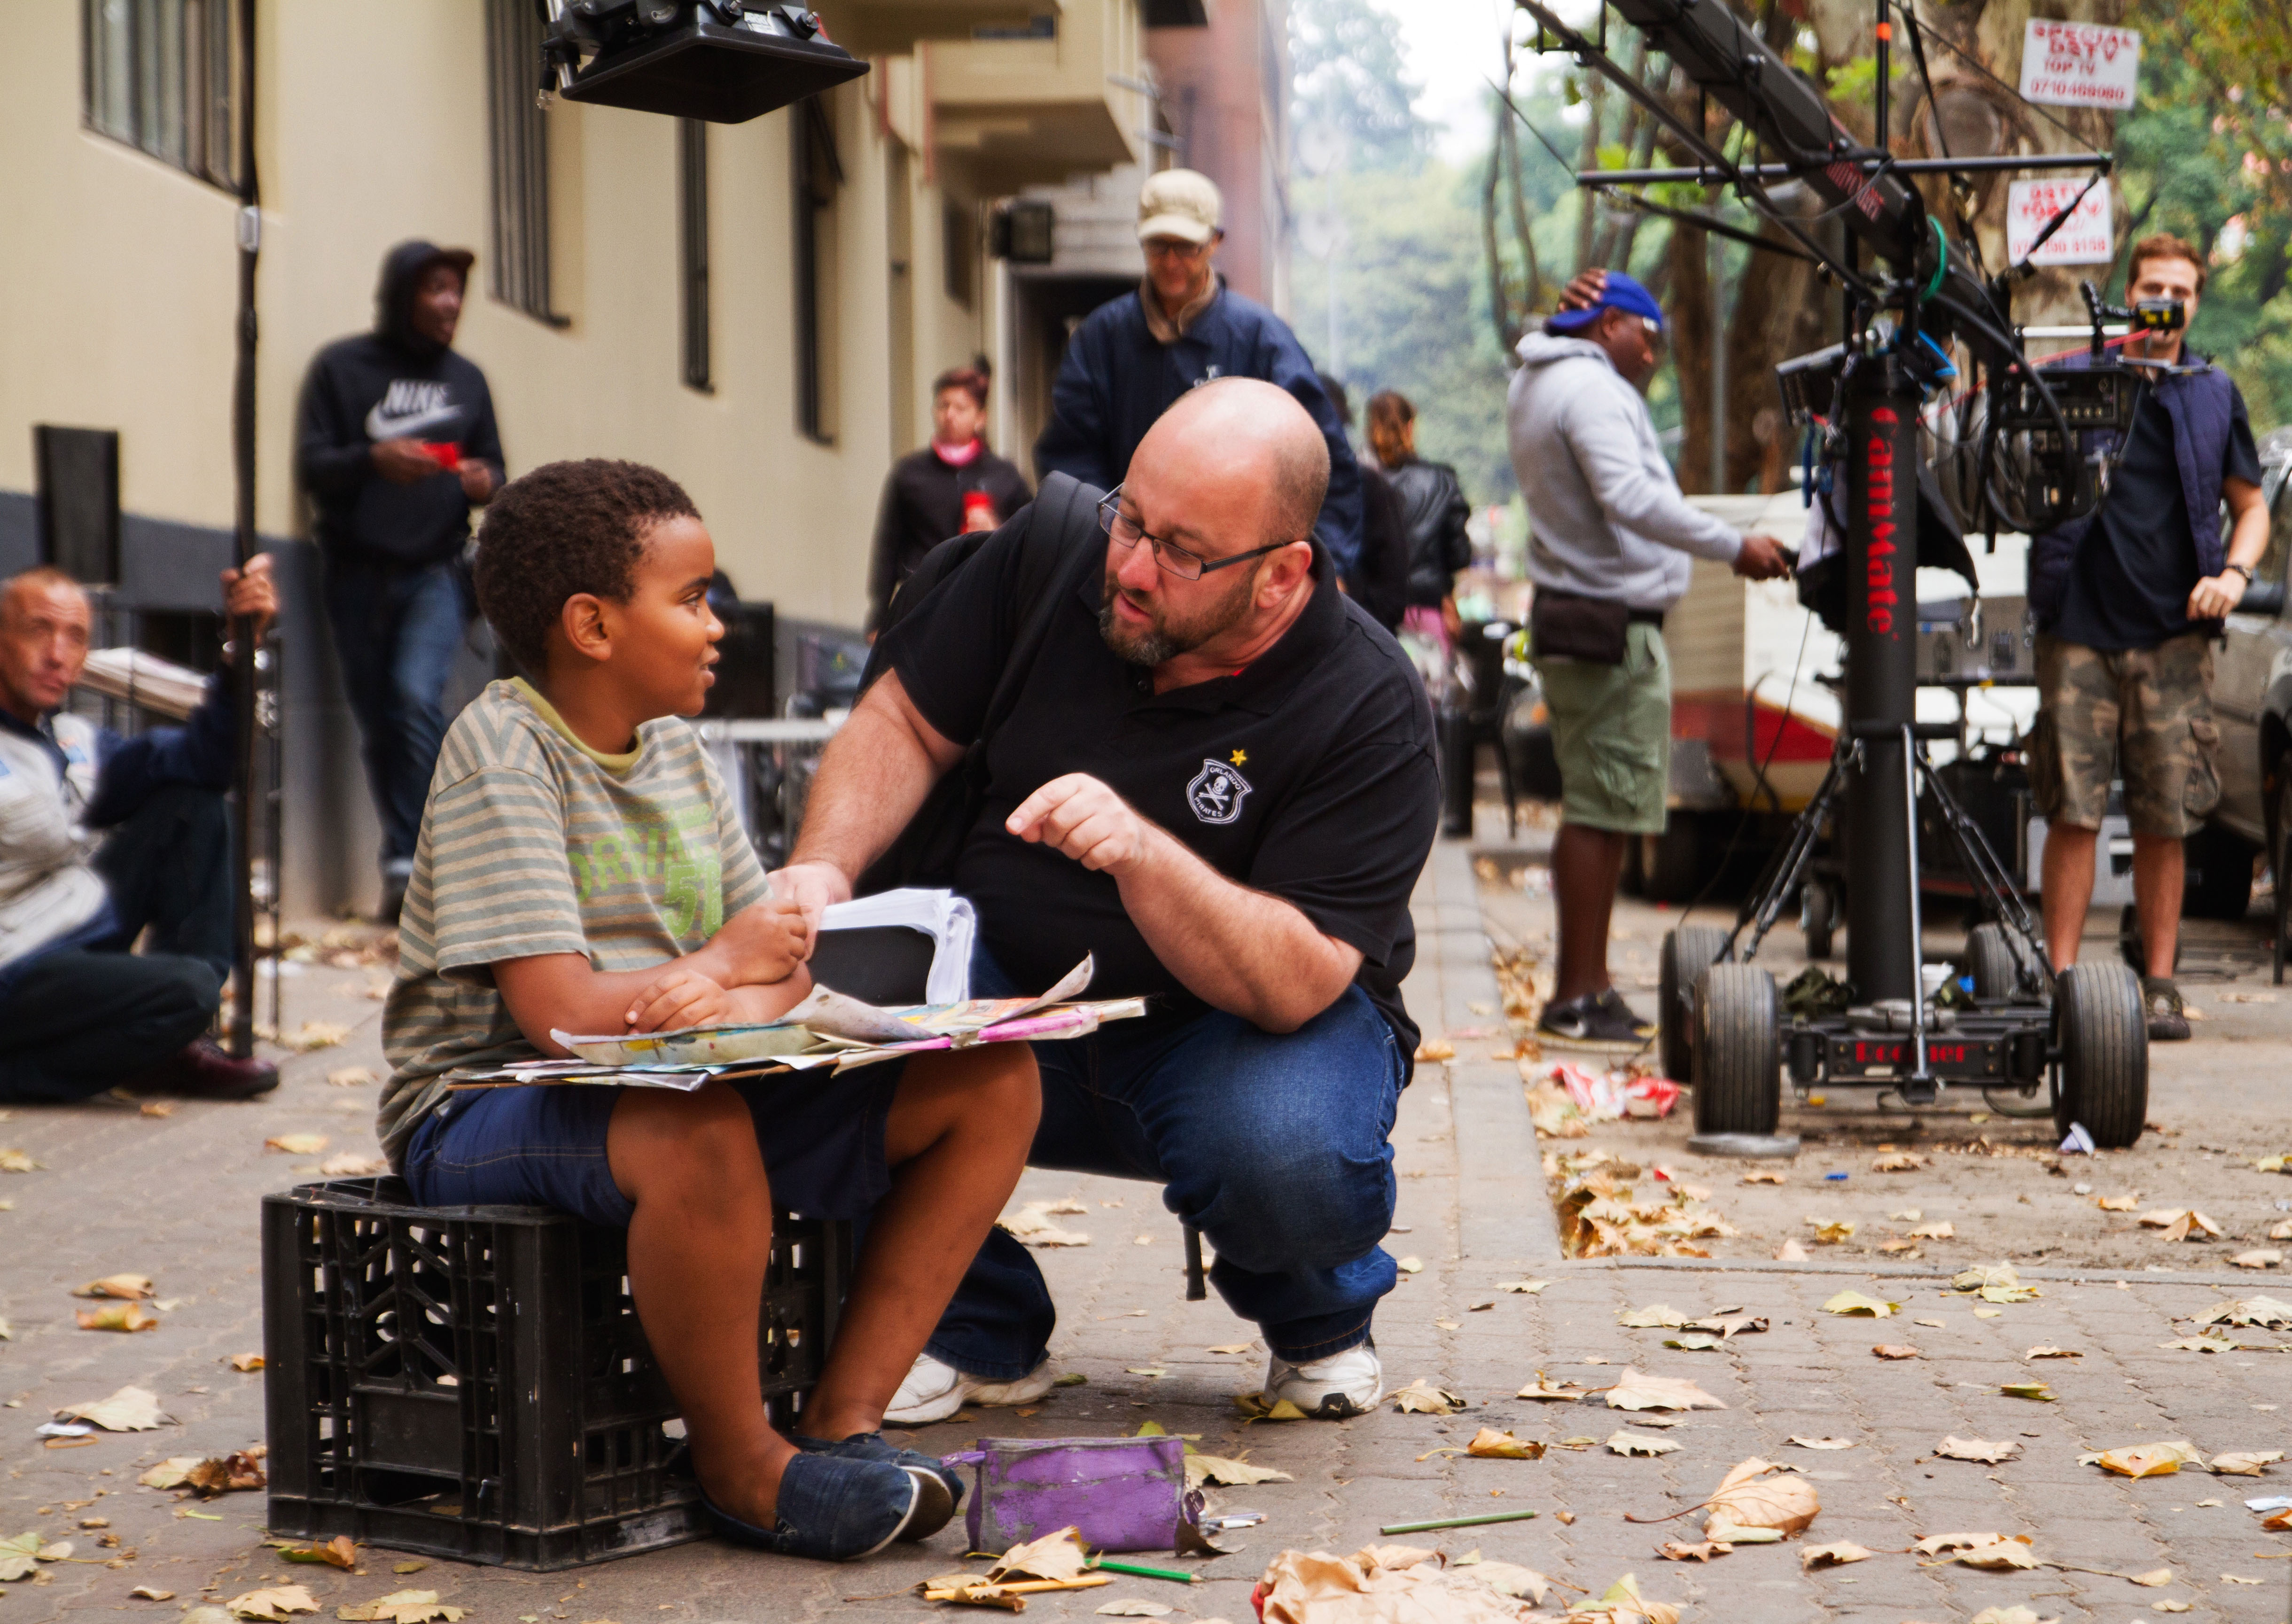 Director Konstandino Kalarytis and actor Paballo Koza on location in Hillbrow, South Africa on the film Dora's Peace.